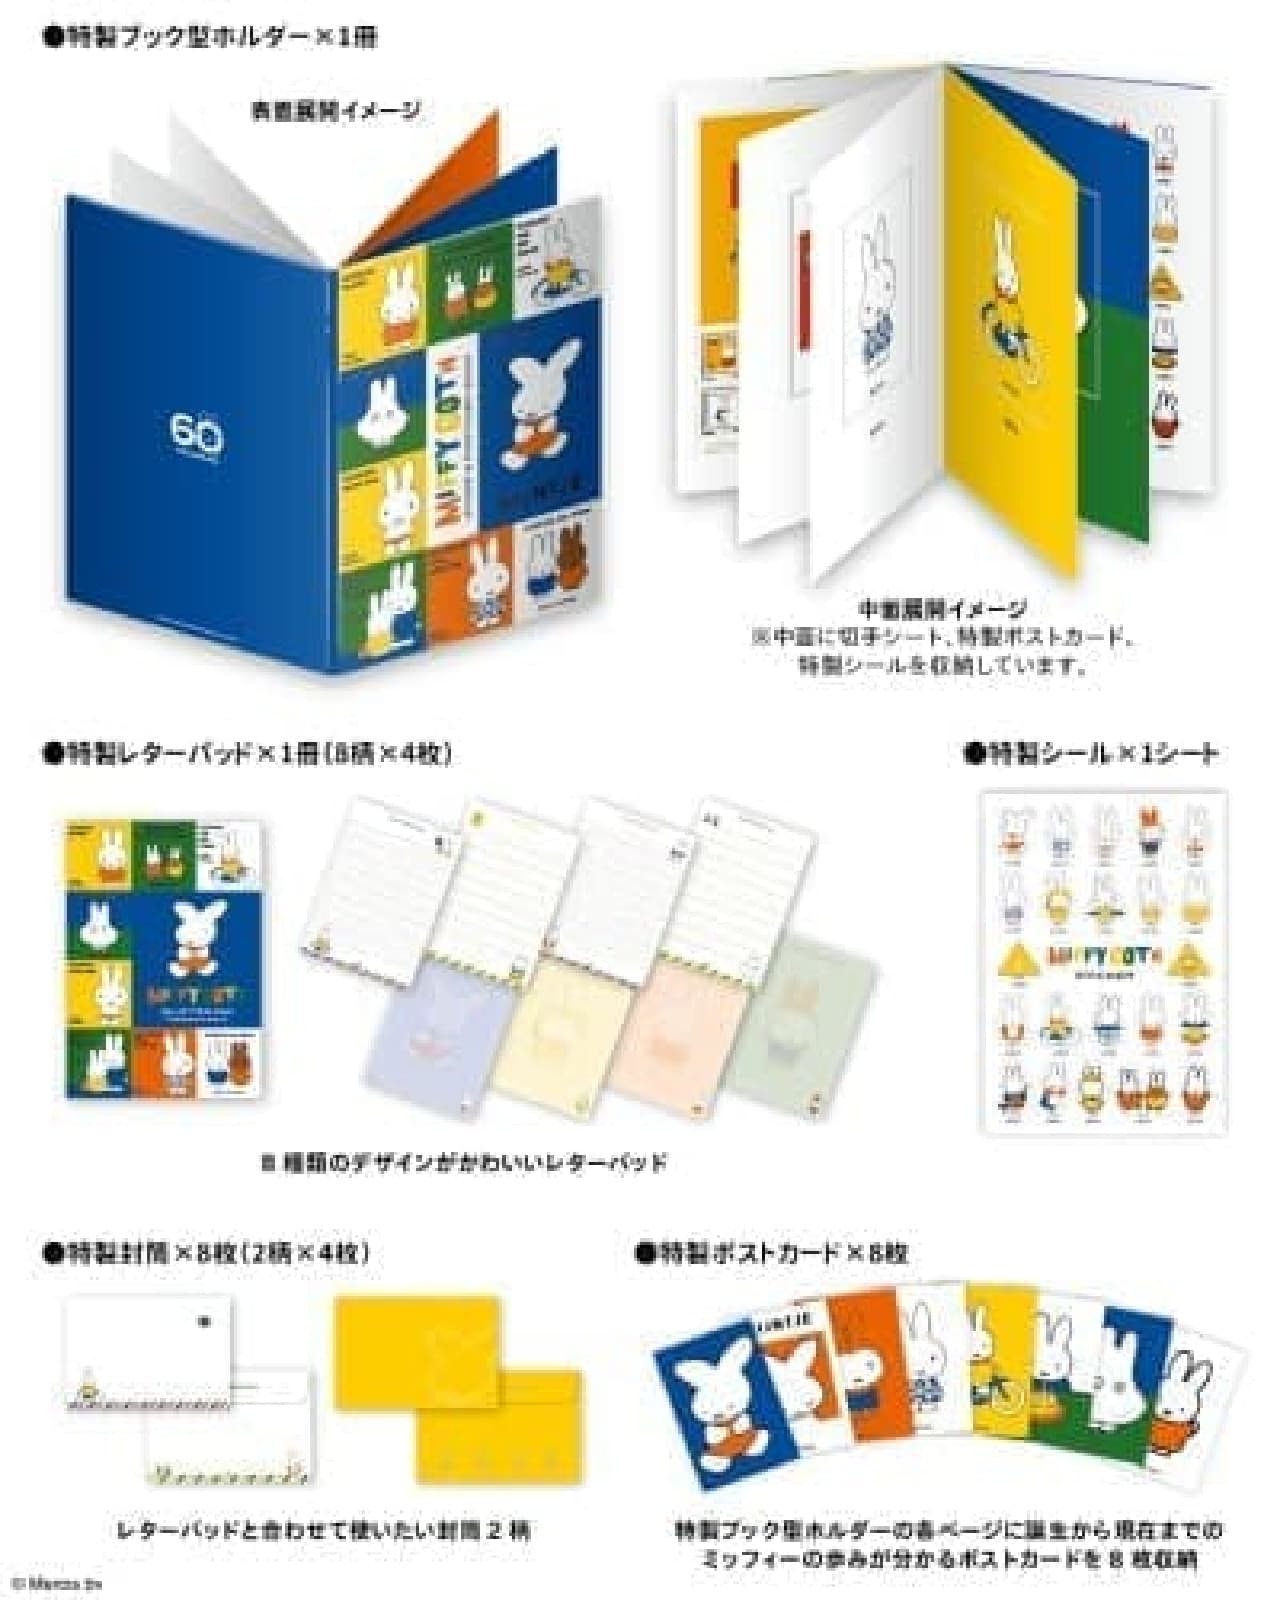 You can see the transition of Miffy with original goods